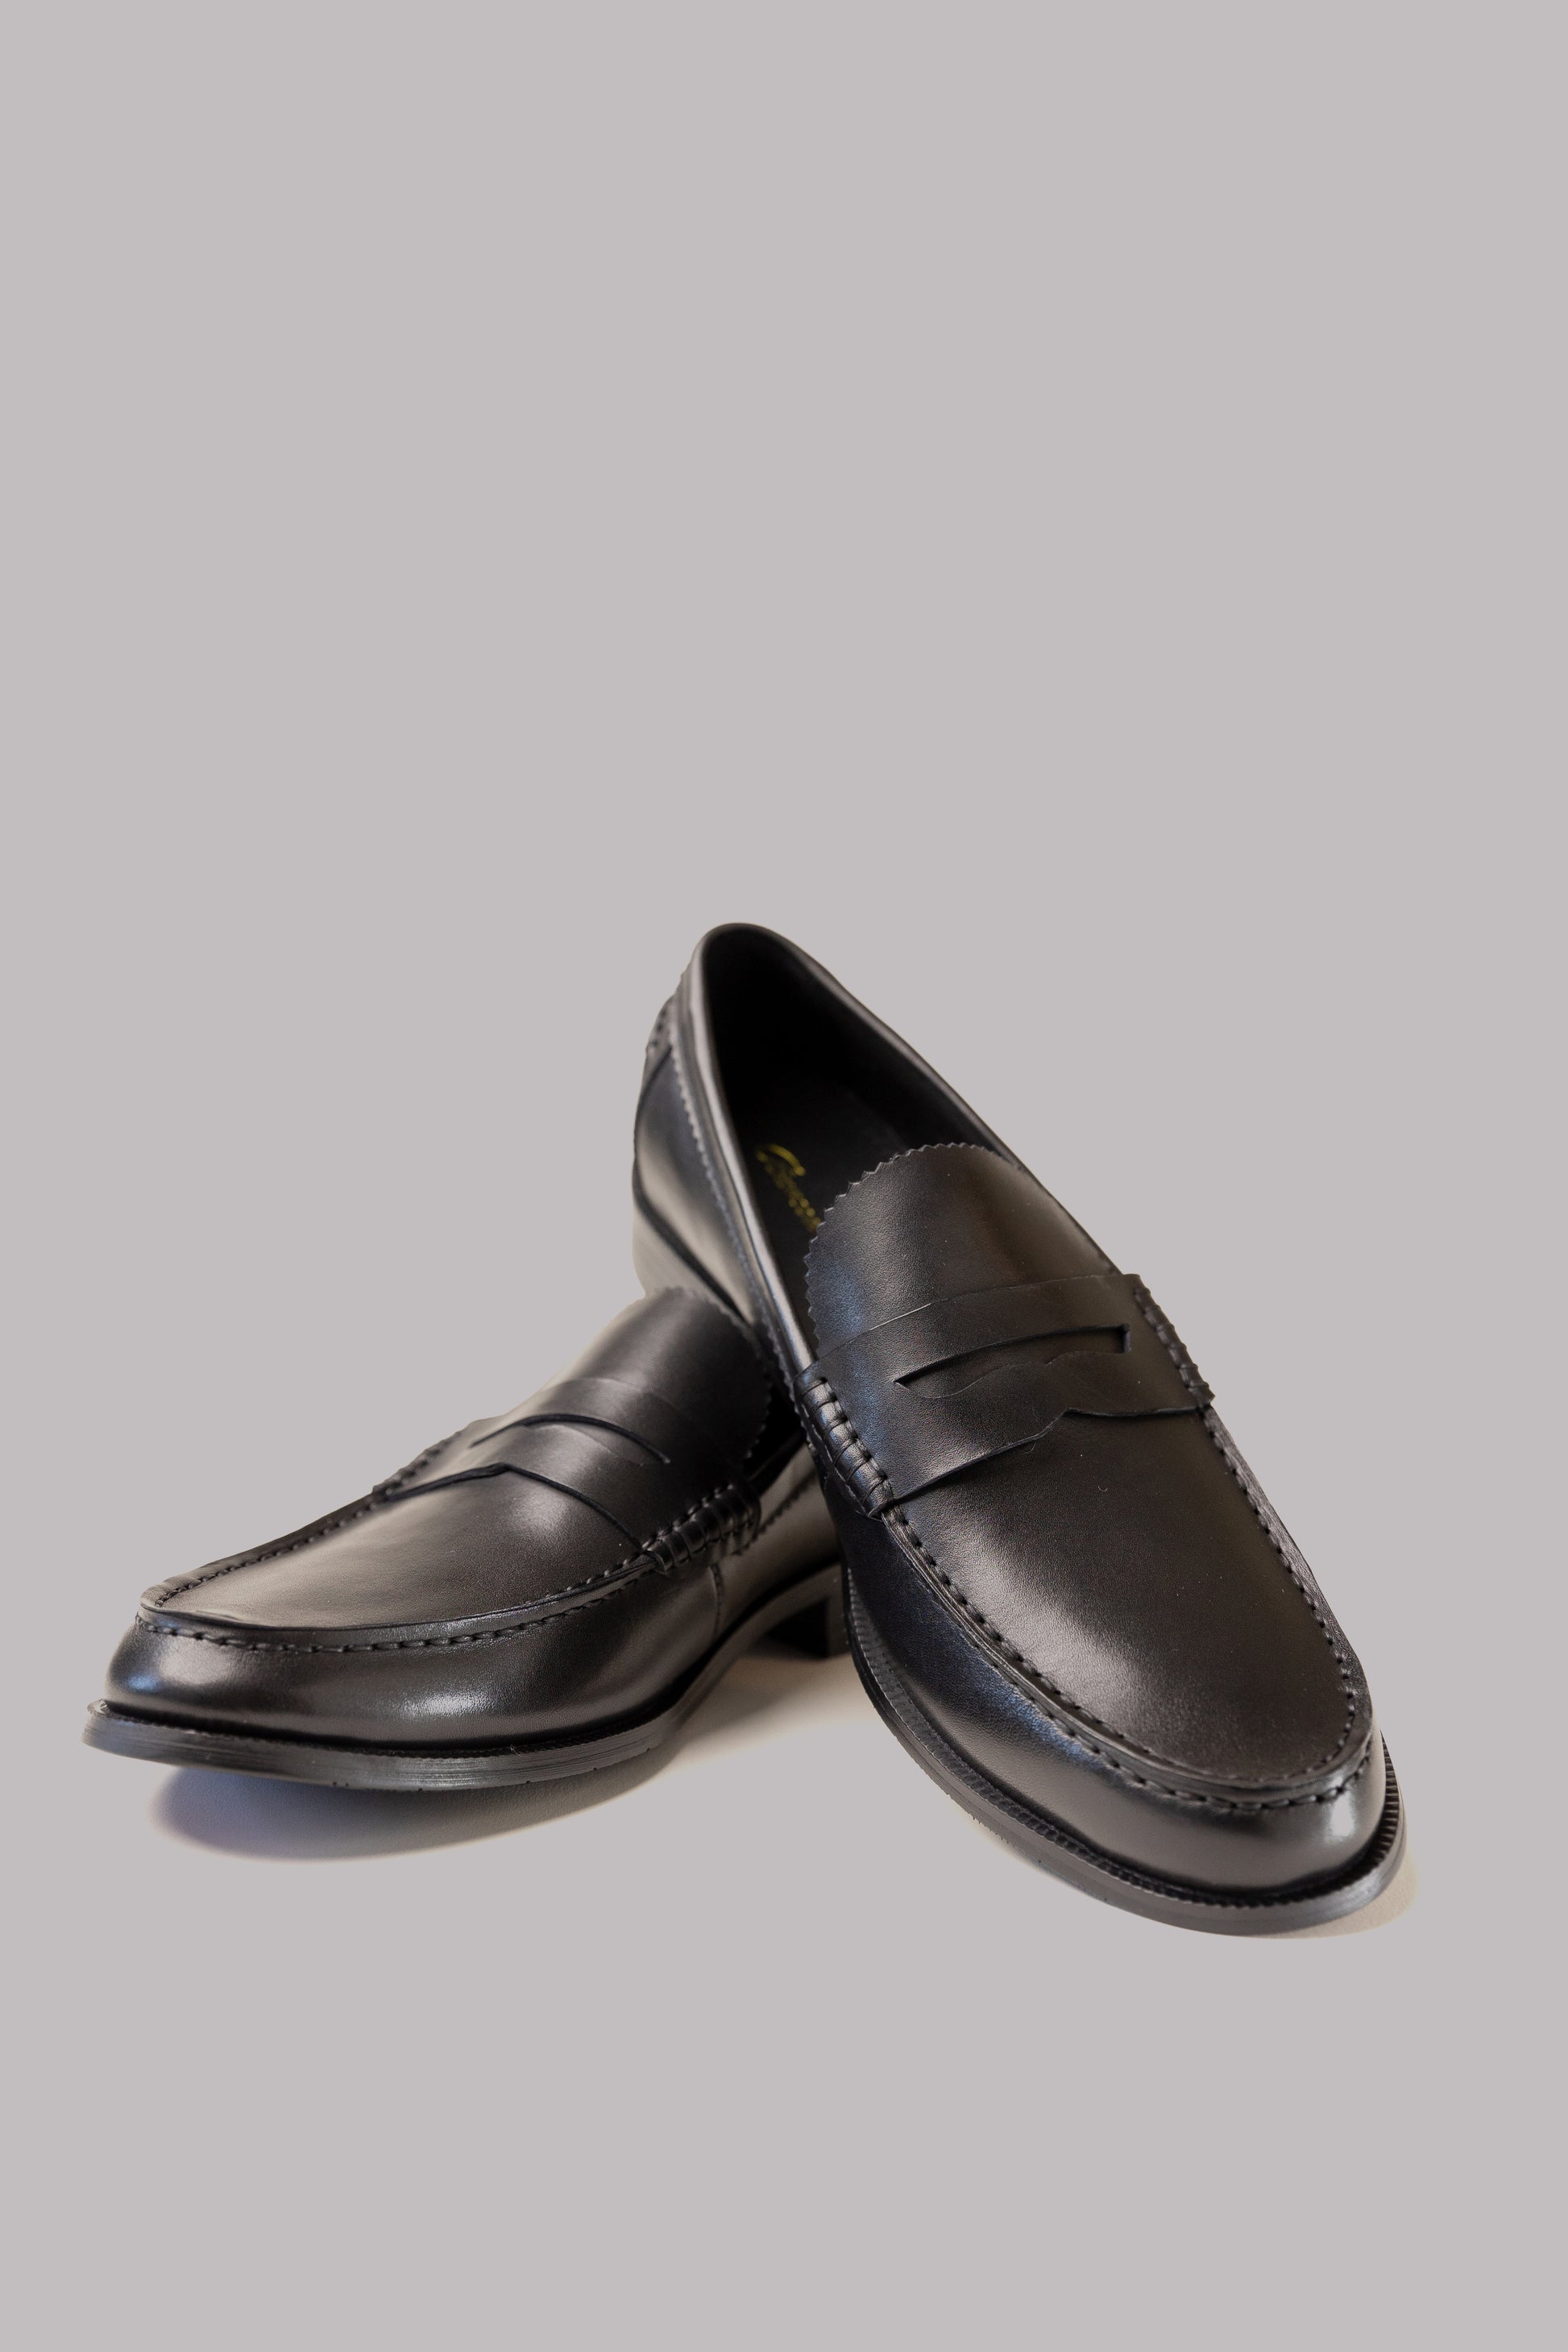 The best leather shoe that is handmade in Ottwa, Canada with the highest quality. The shoe is made from 100% leather and has a full leather insole liner for comfort - The best Leather shoe in Canada.